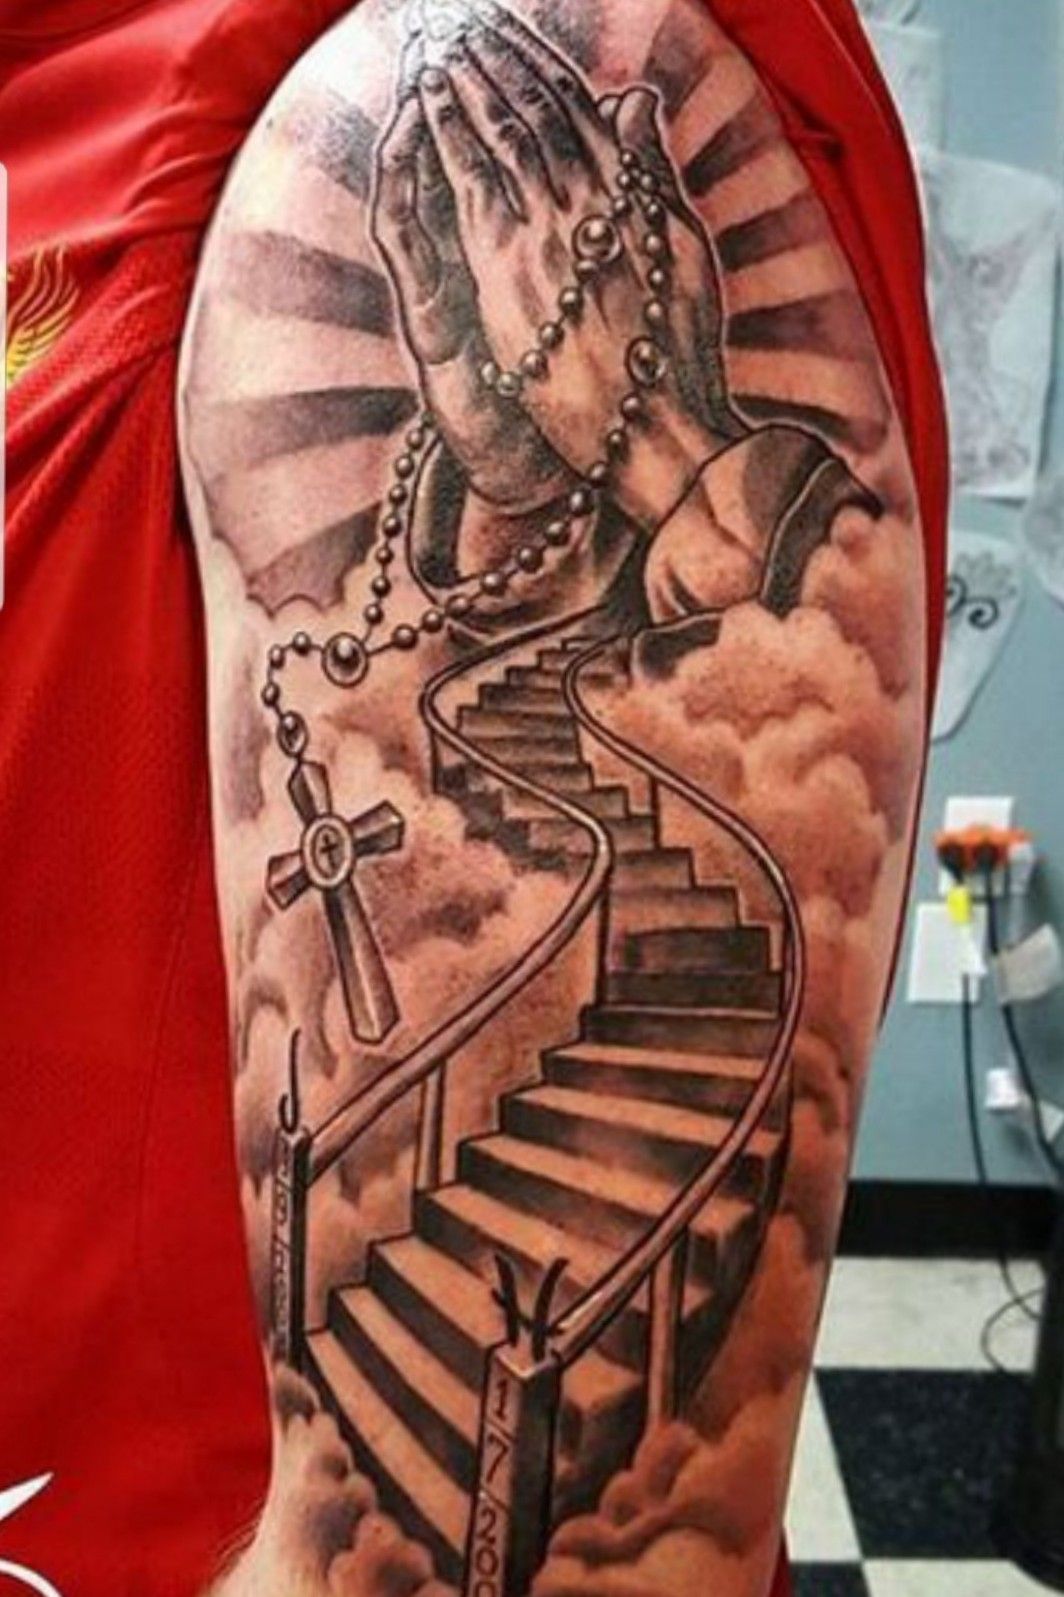 How bad is my stairway to heaven  rtraditionaltattoos